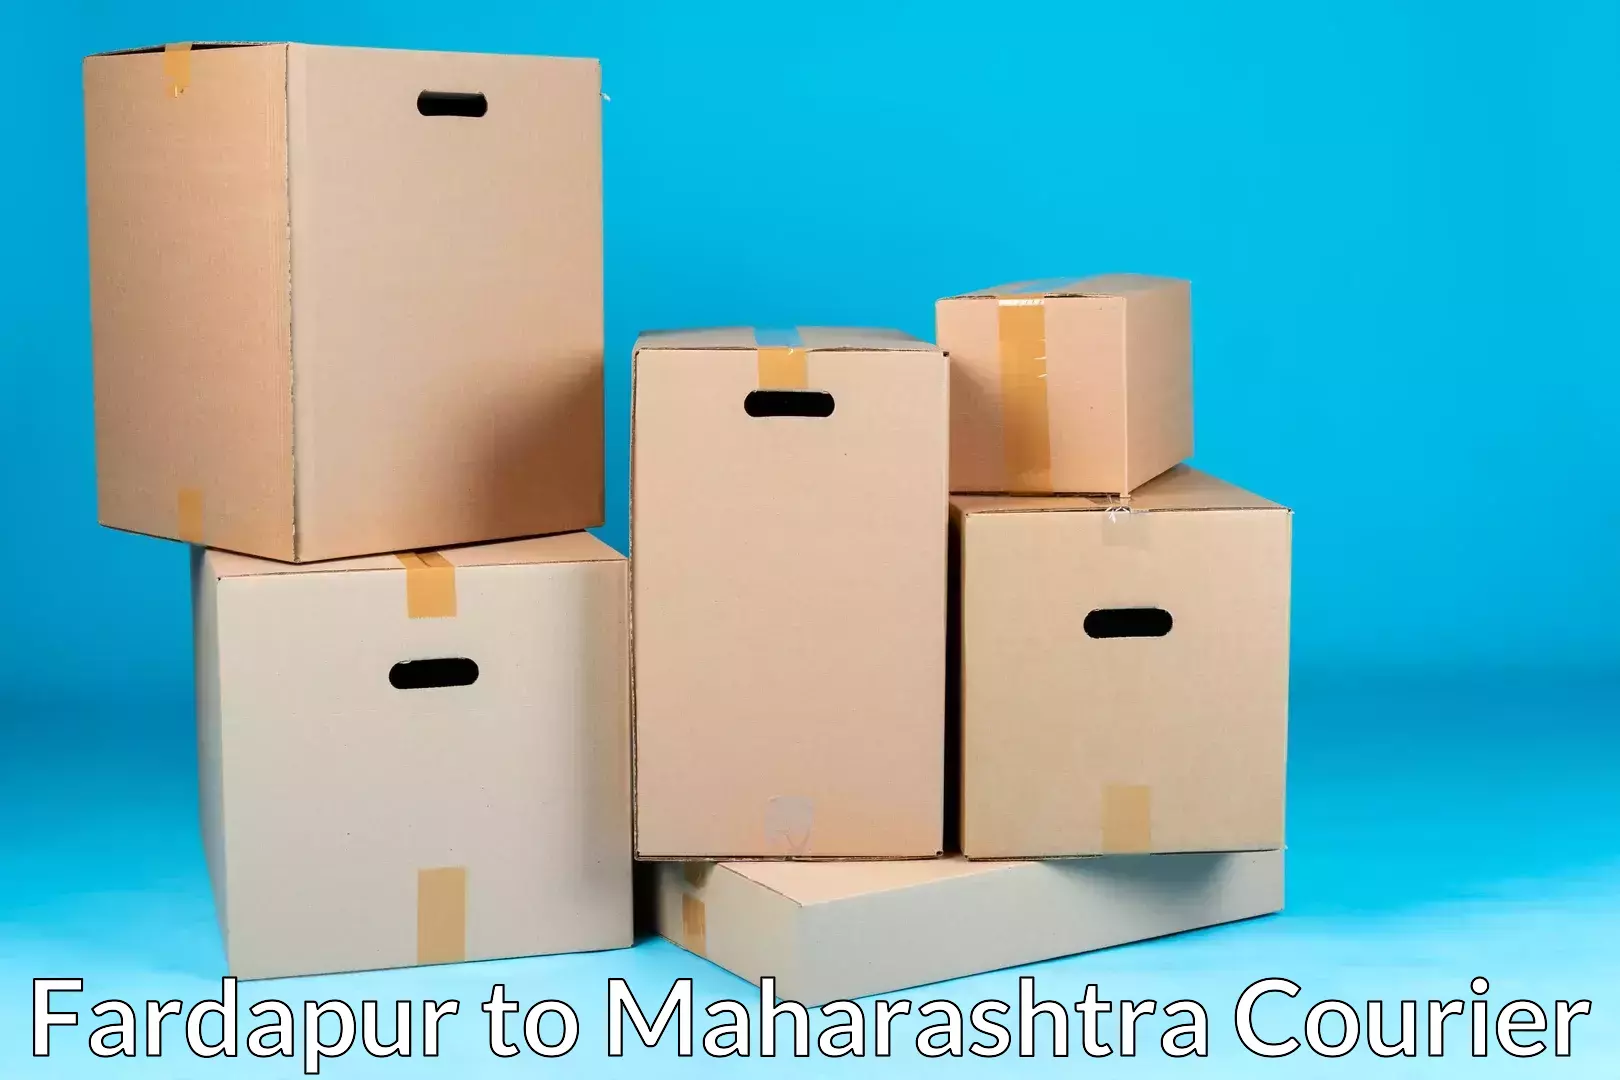 Nationwide moving services Fardapur to Lonavala